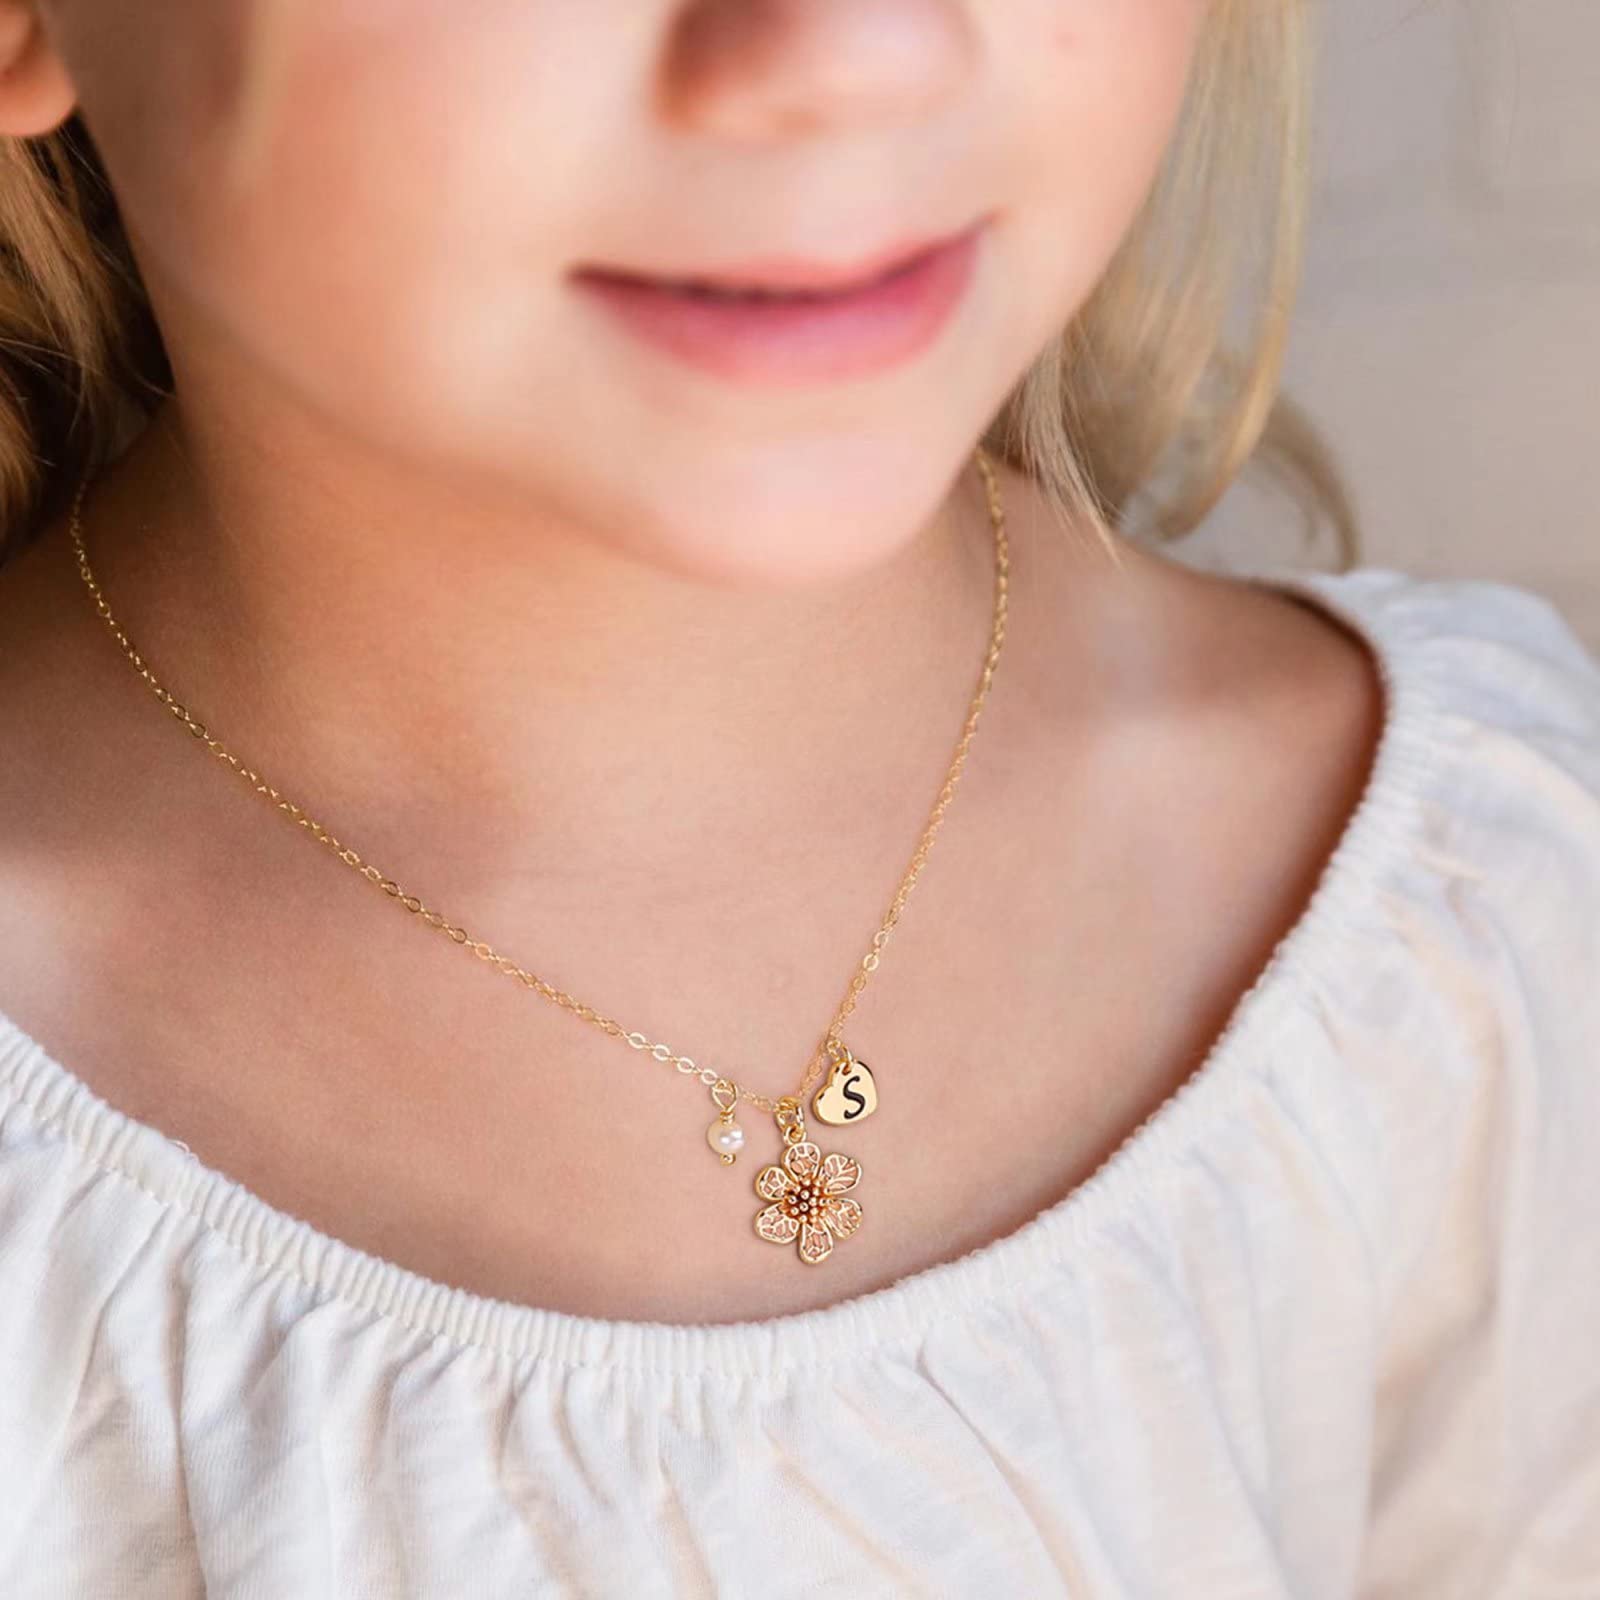 IEFLIFE Flower Girl Gifts, 14K Gold Plated Heart Initial Necklace Flower Girl Proposal Dainty Flower Girl Letter Necklace Wedding Gifts for Girls